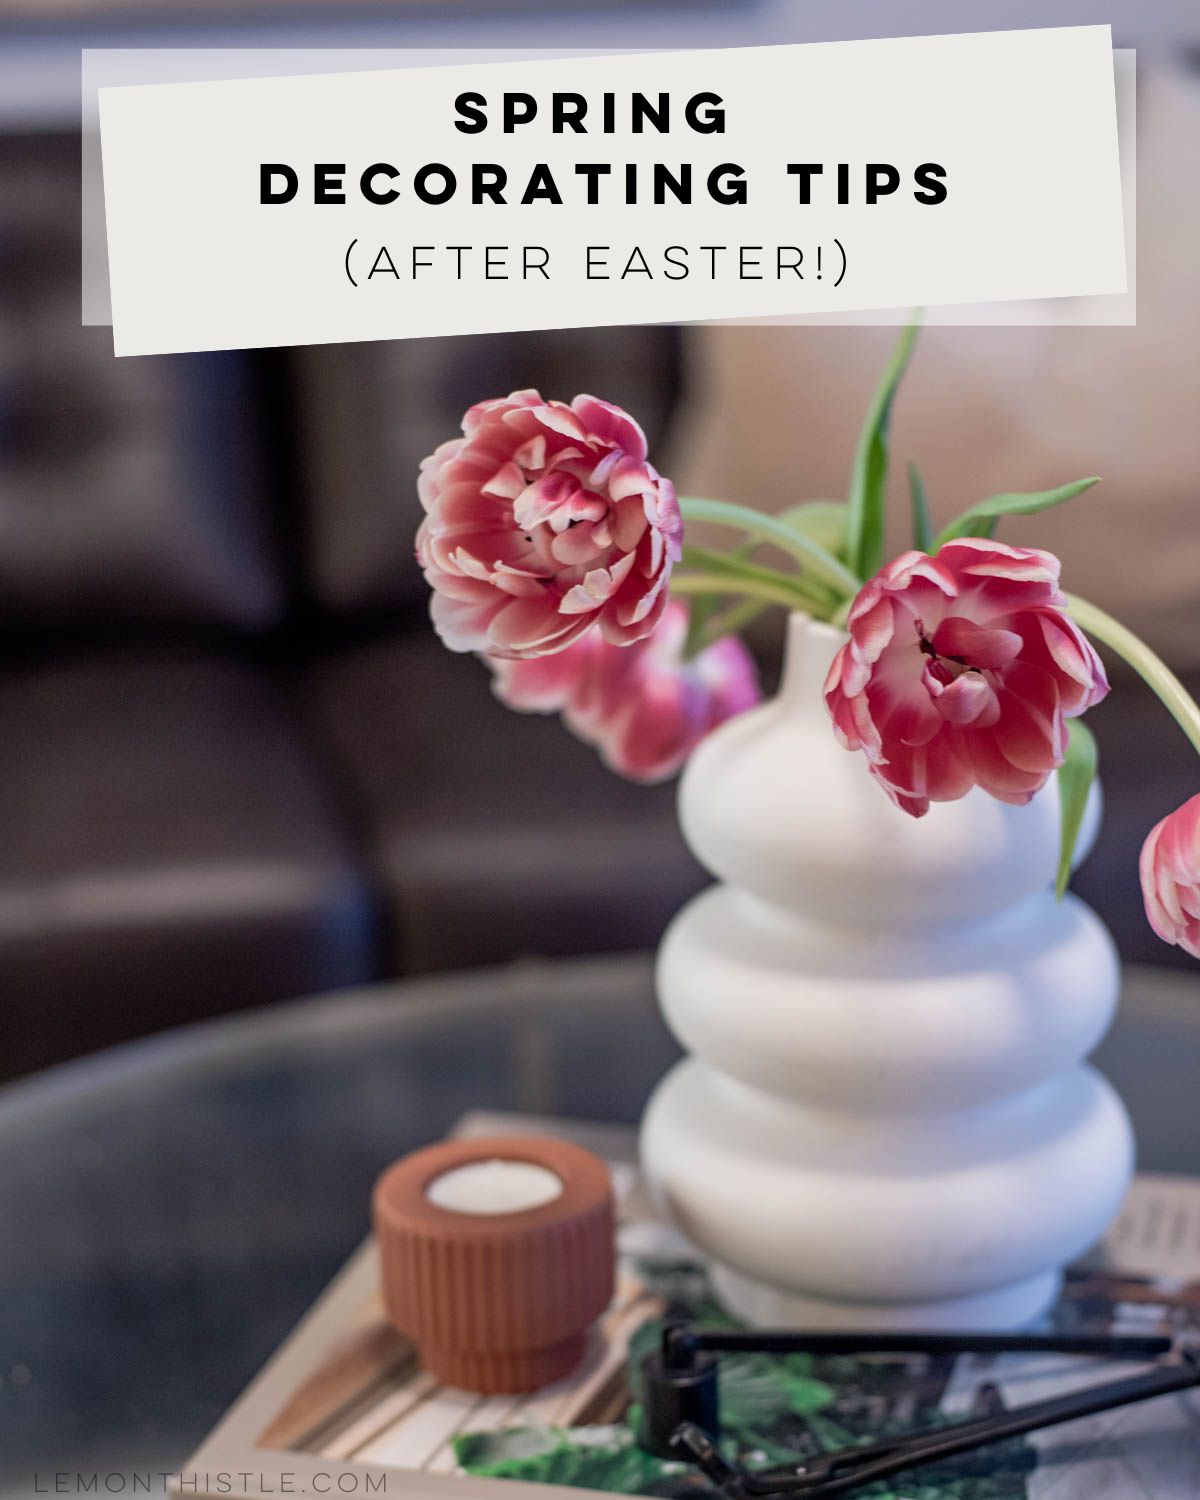 image of vase of pink double tulips, text reads: Decorating tips for spring (after easter)